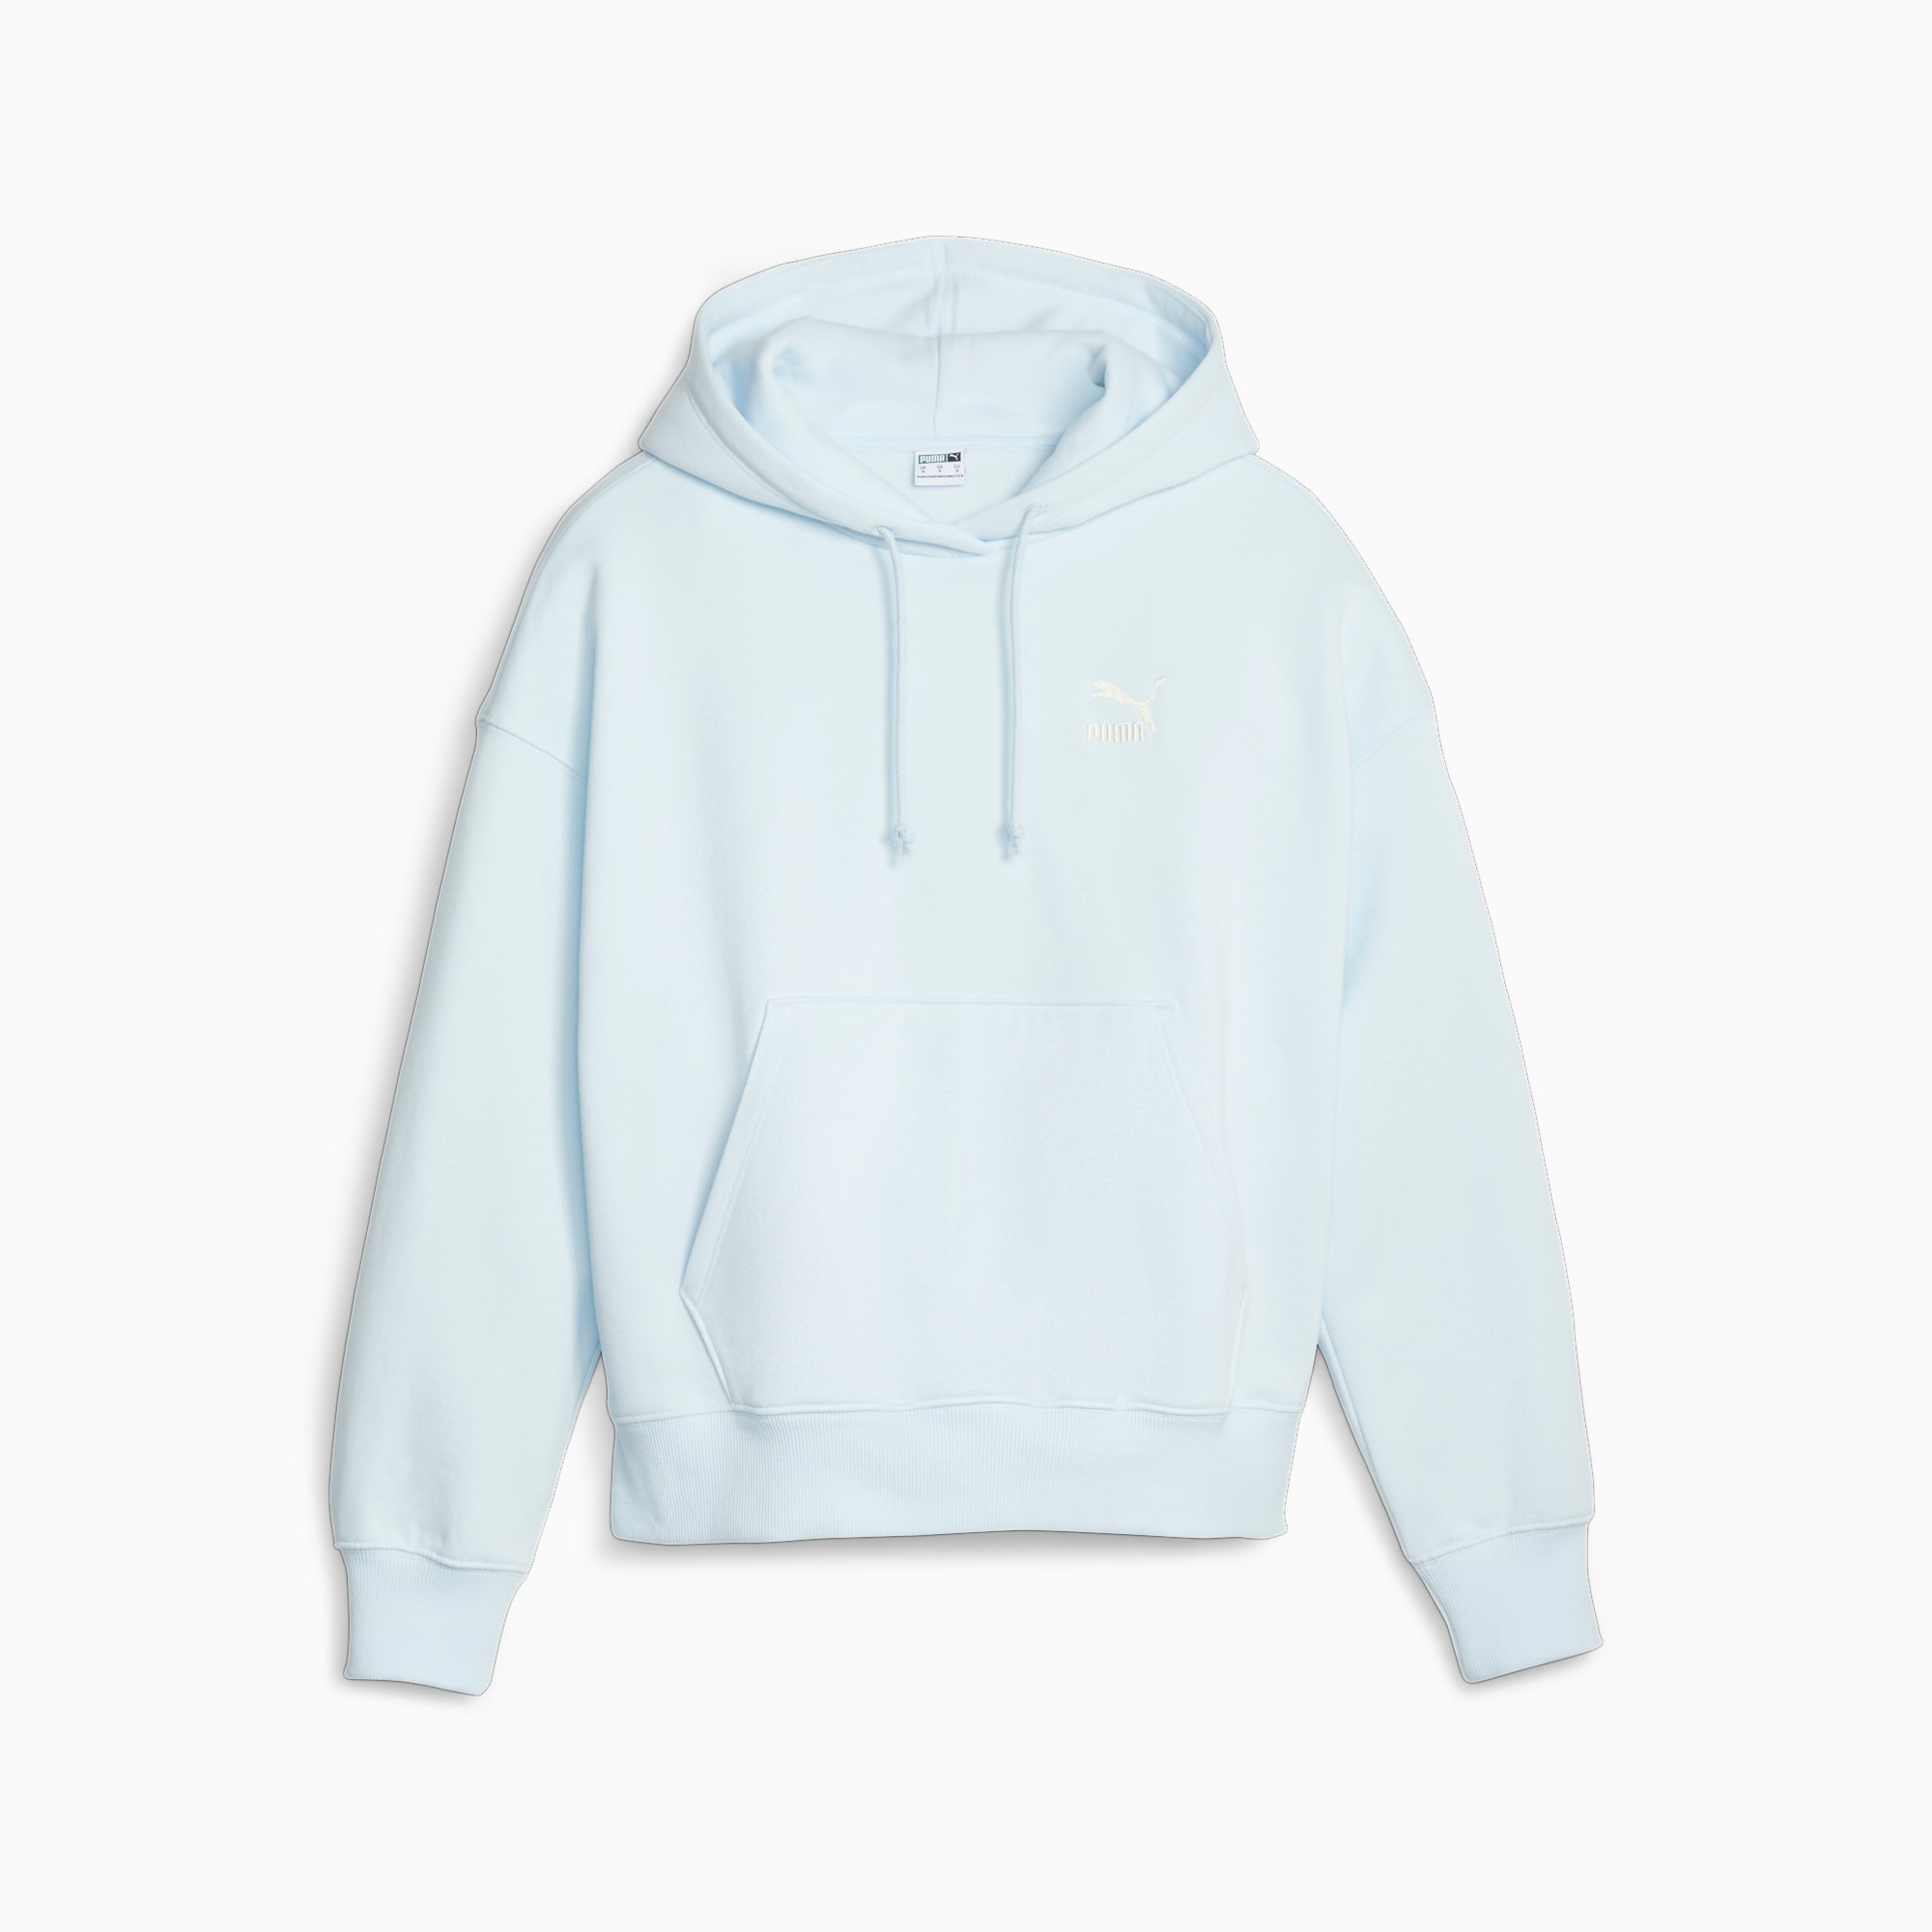 PUMA Classics Women's Oversized Hoodie, Icy Blue, Size S, Clothing